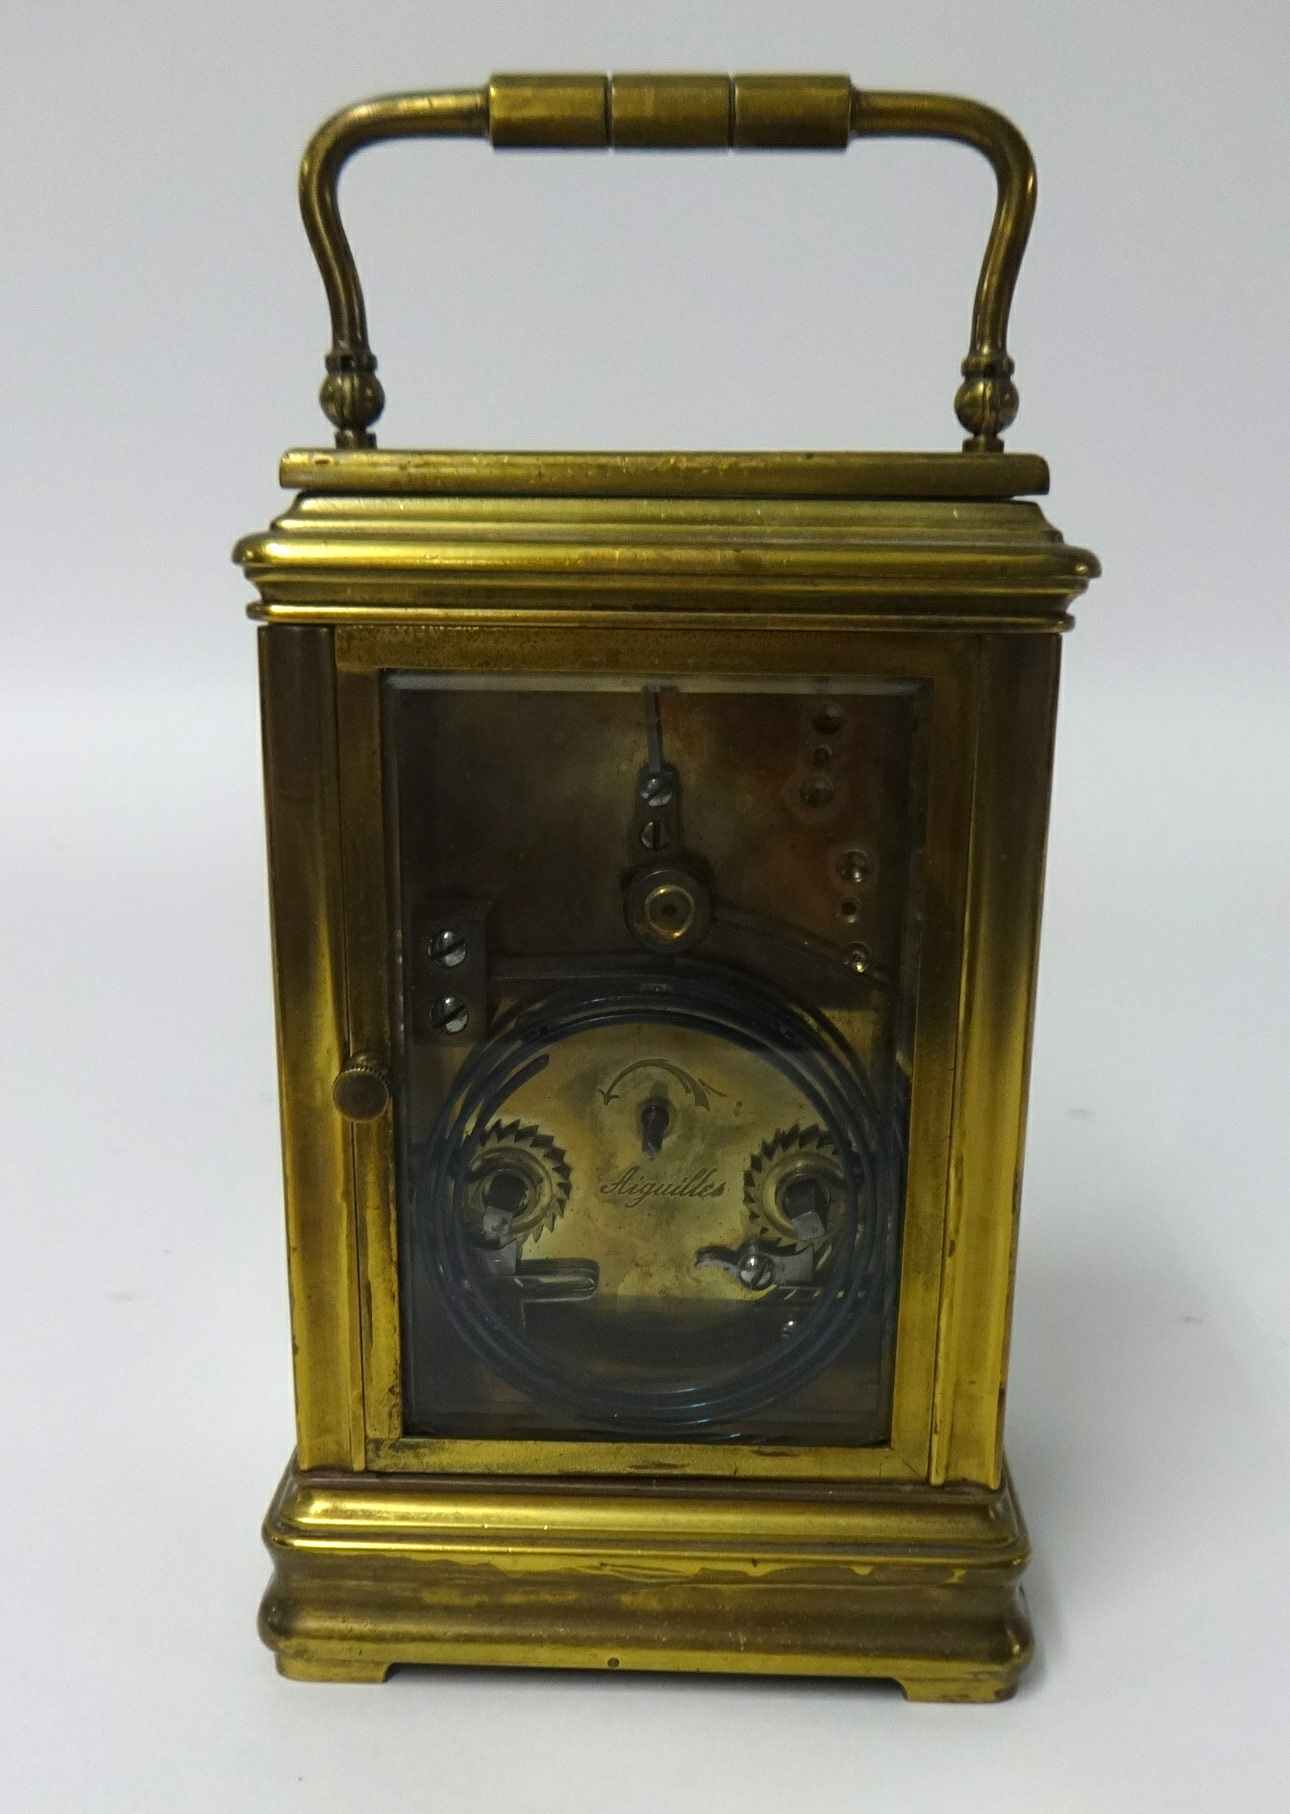 A carriage clock, C.H.Cornish, Plymouth. - Image 3 of 3